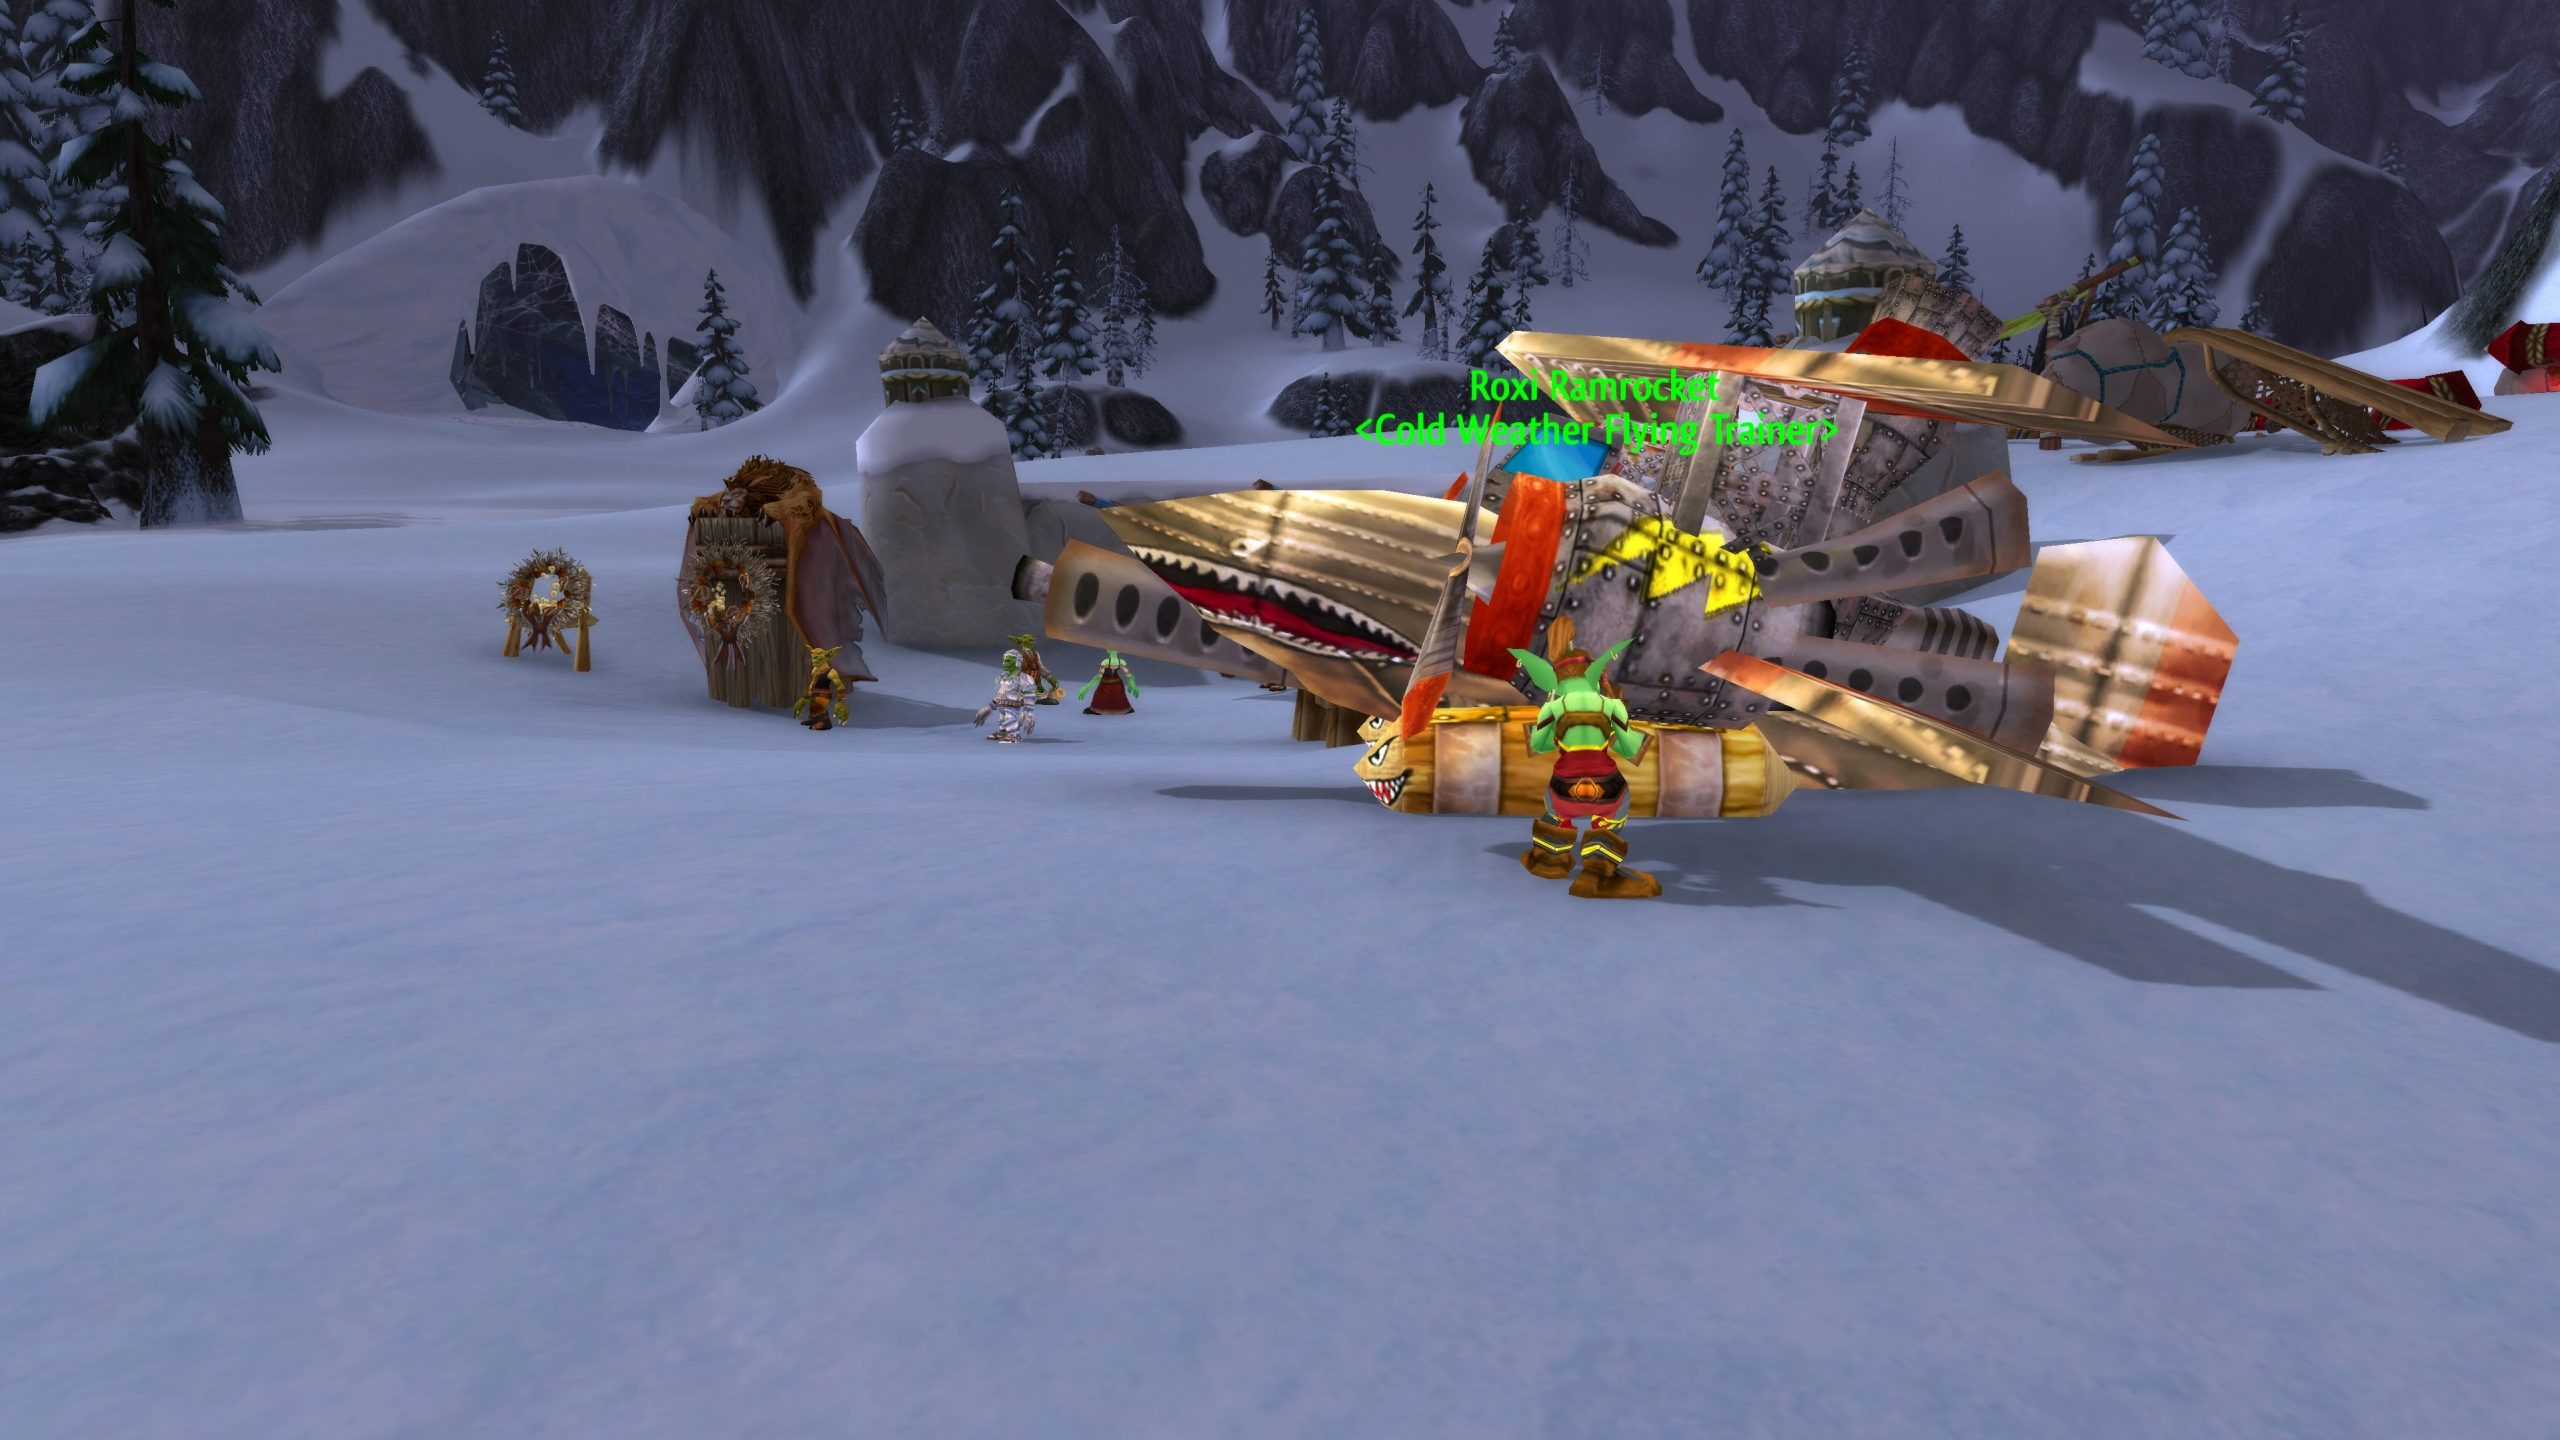 Riding Profession Overview, Flying in Northrend - Wrath of the